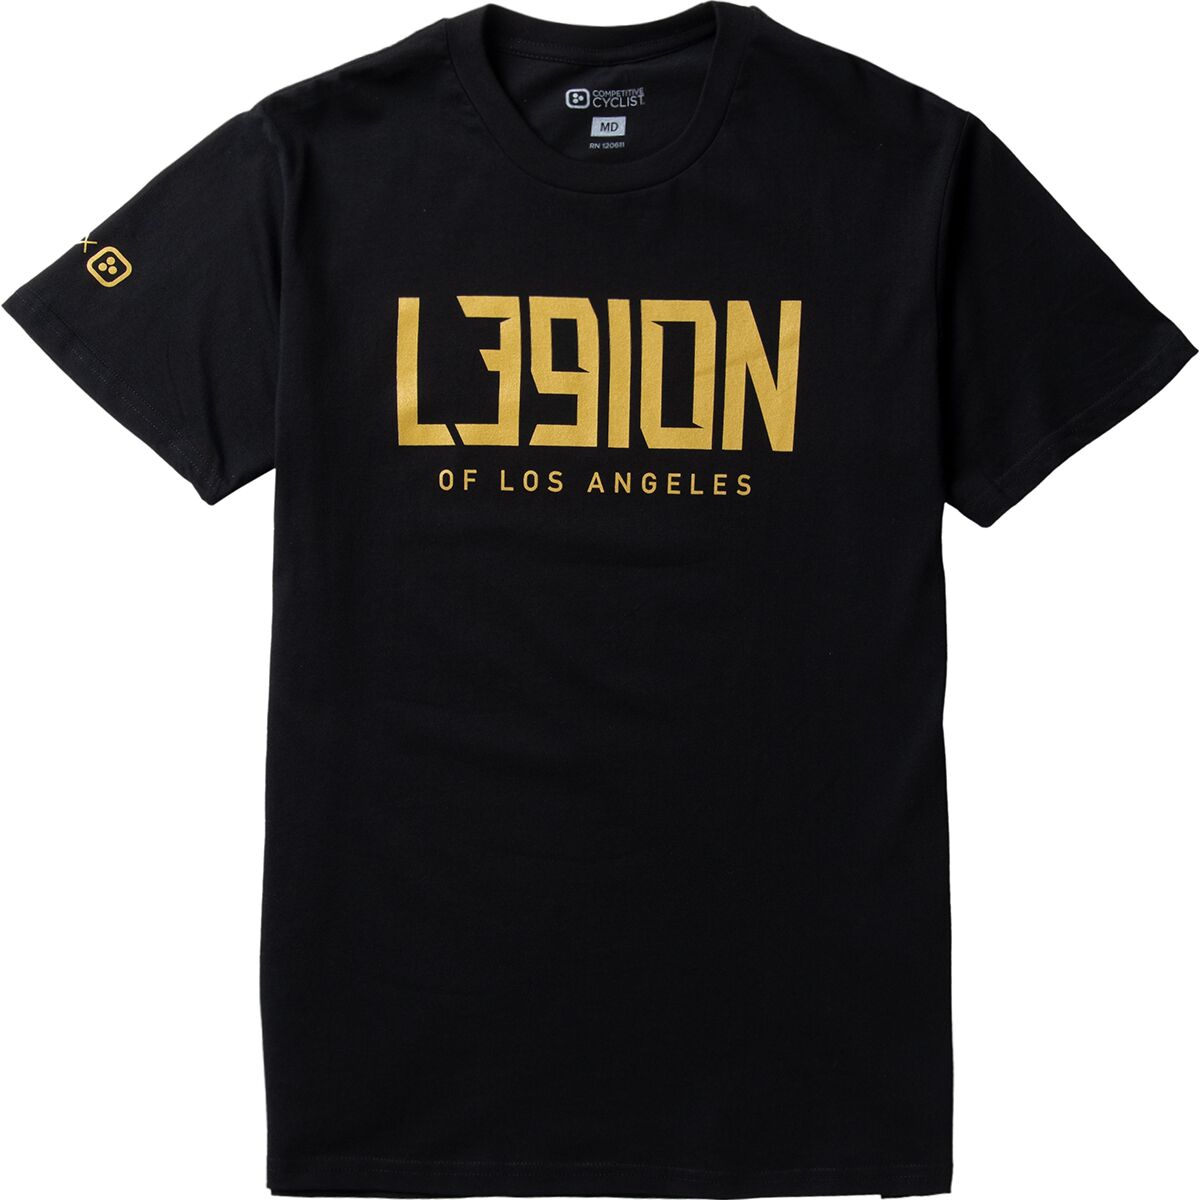 Competitive Cyclist L39ION T-Shirt